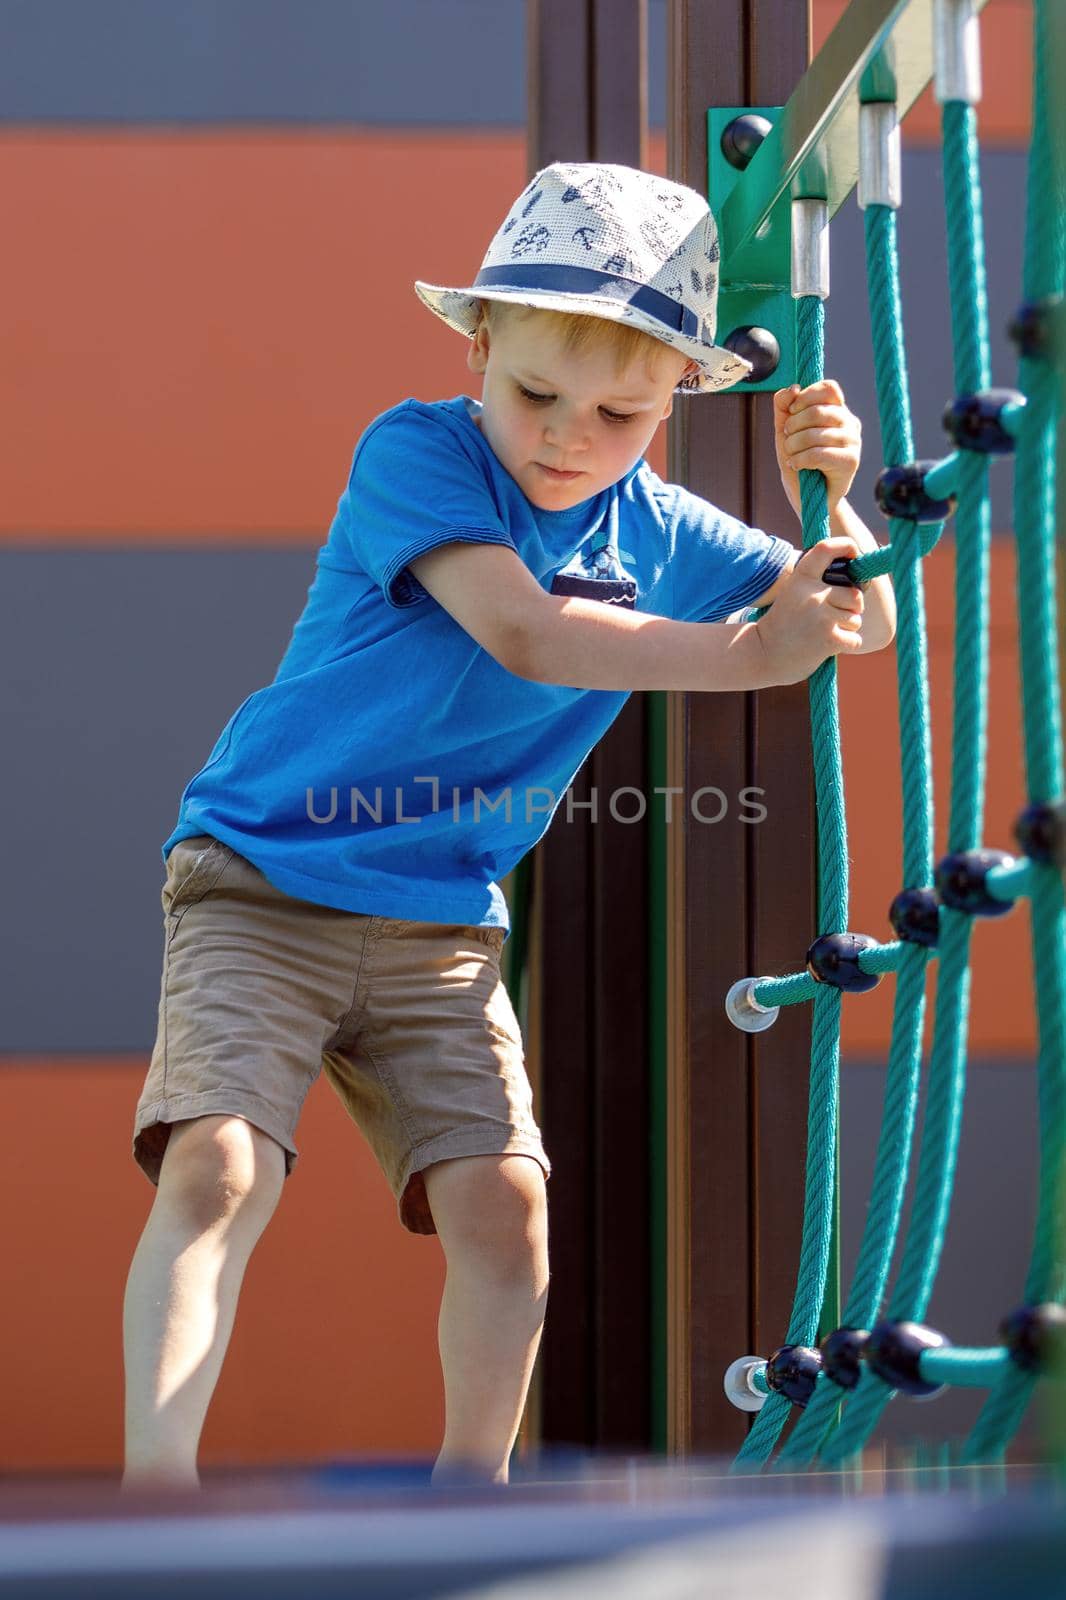 Low angle view of adorable little boy with hat having fun at playground by Lincikas